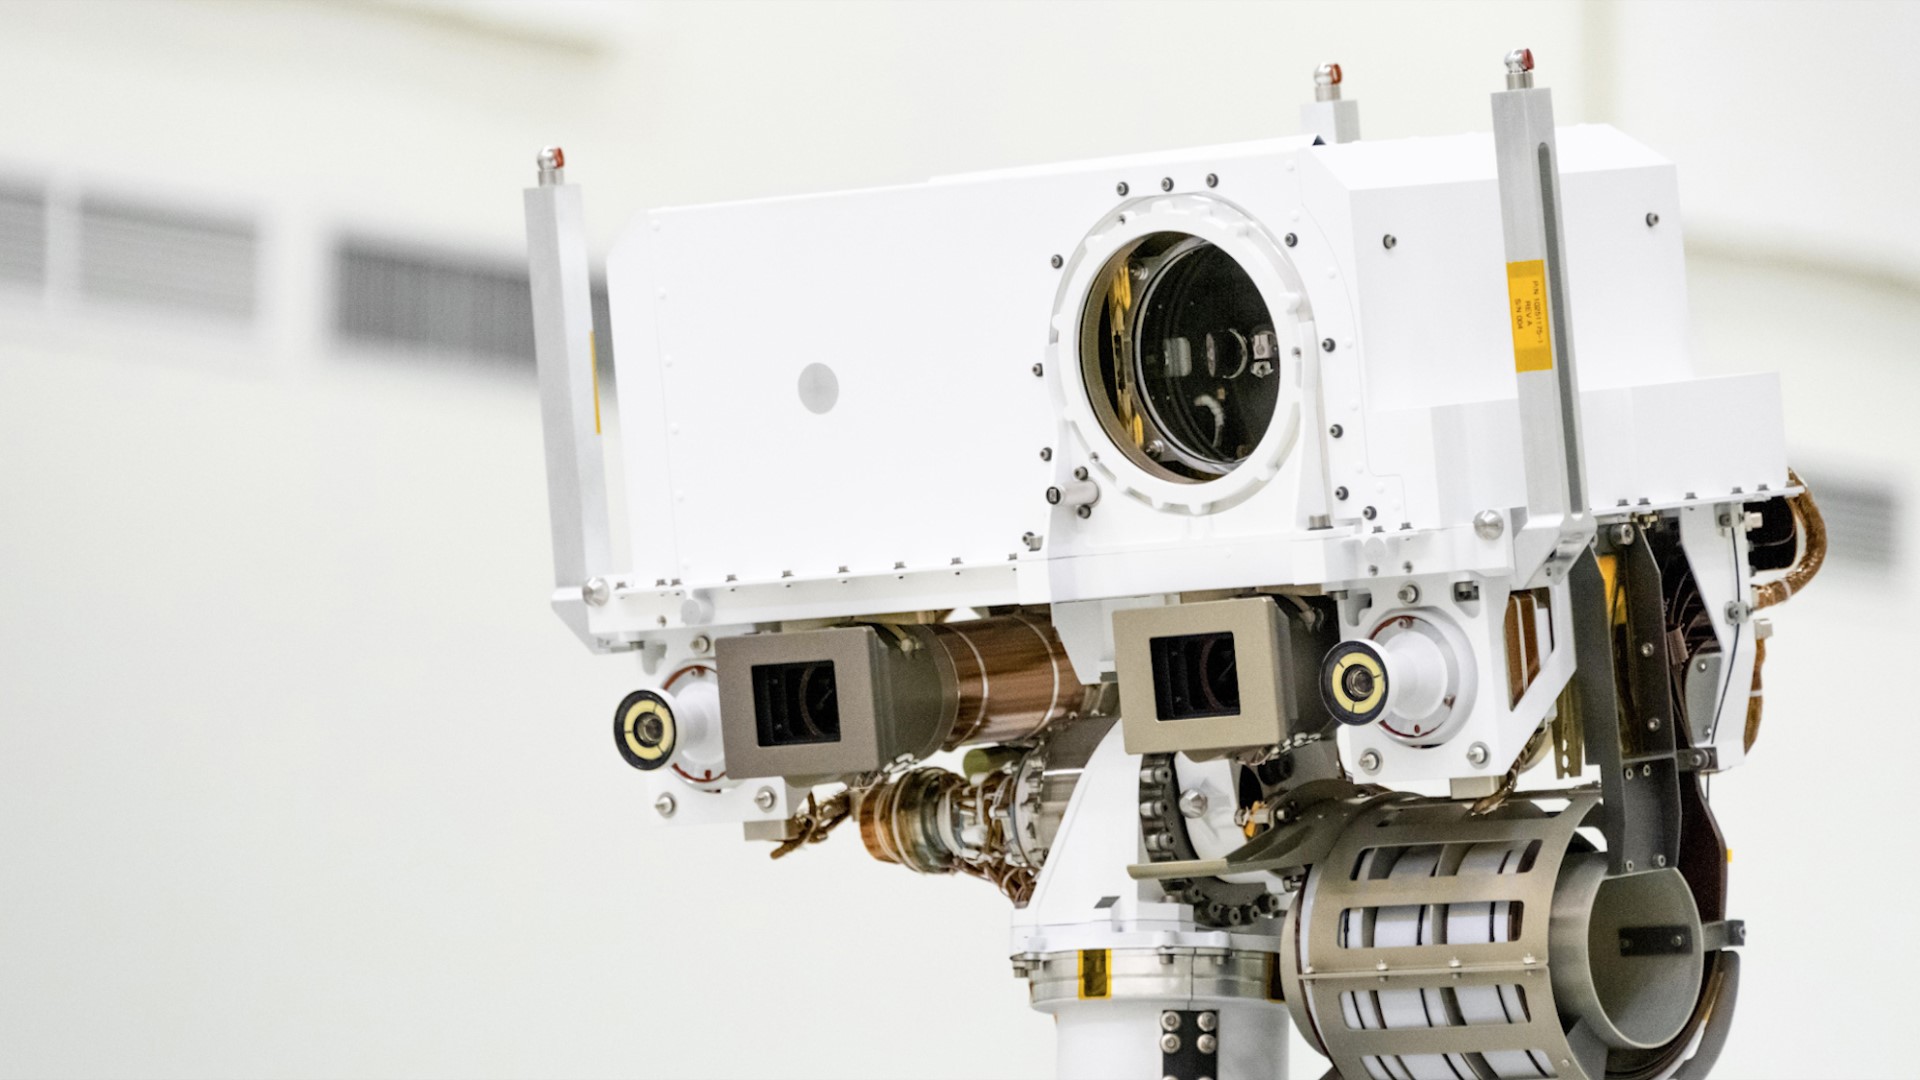 The rover's SuperCam laser and microphone will help scientists search for fossilized life on Mars.